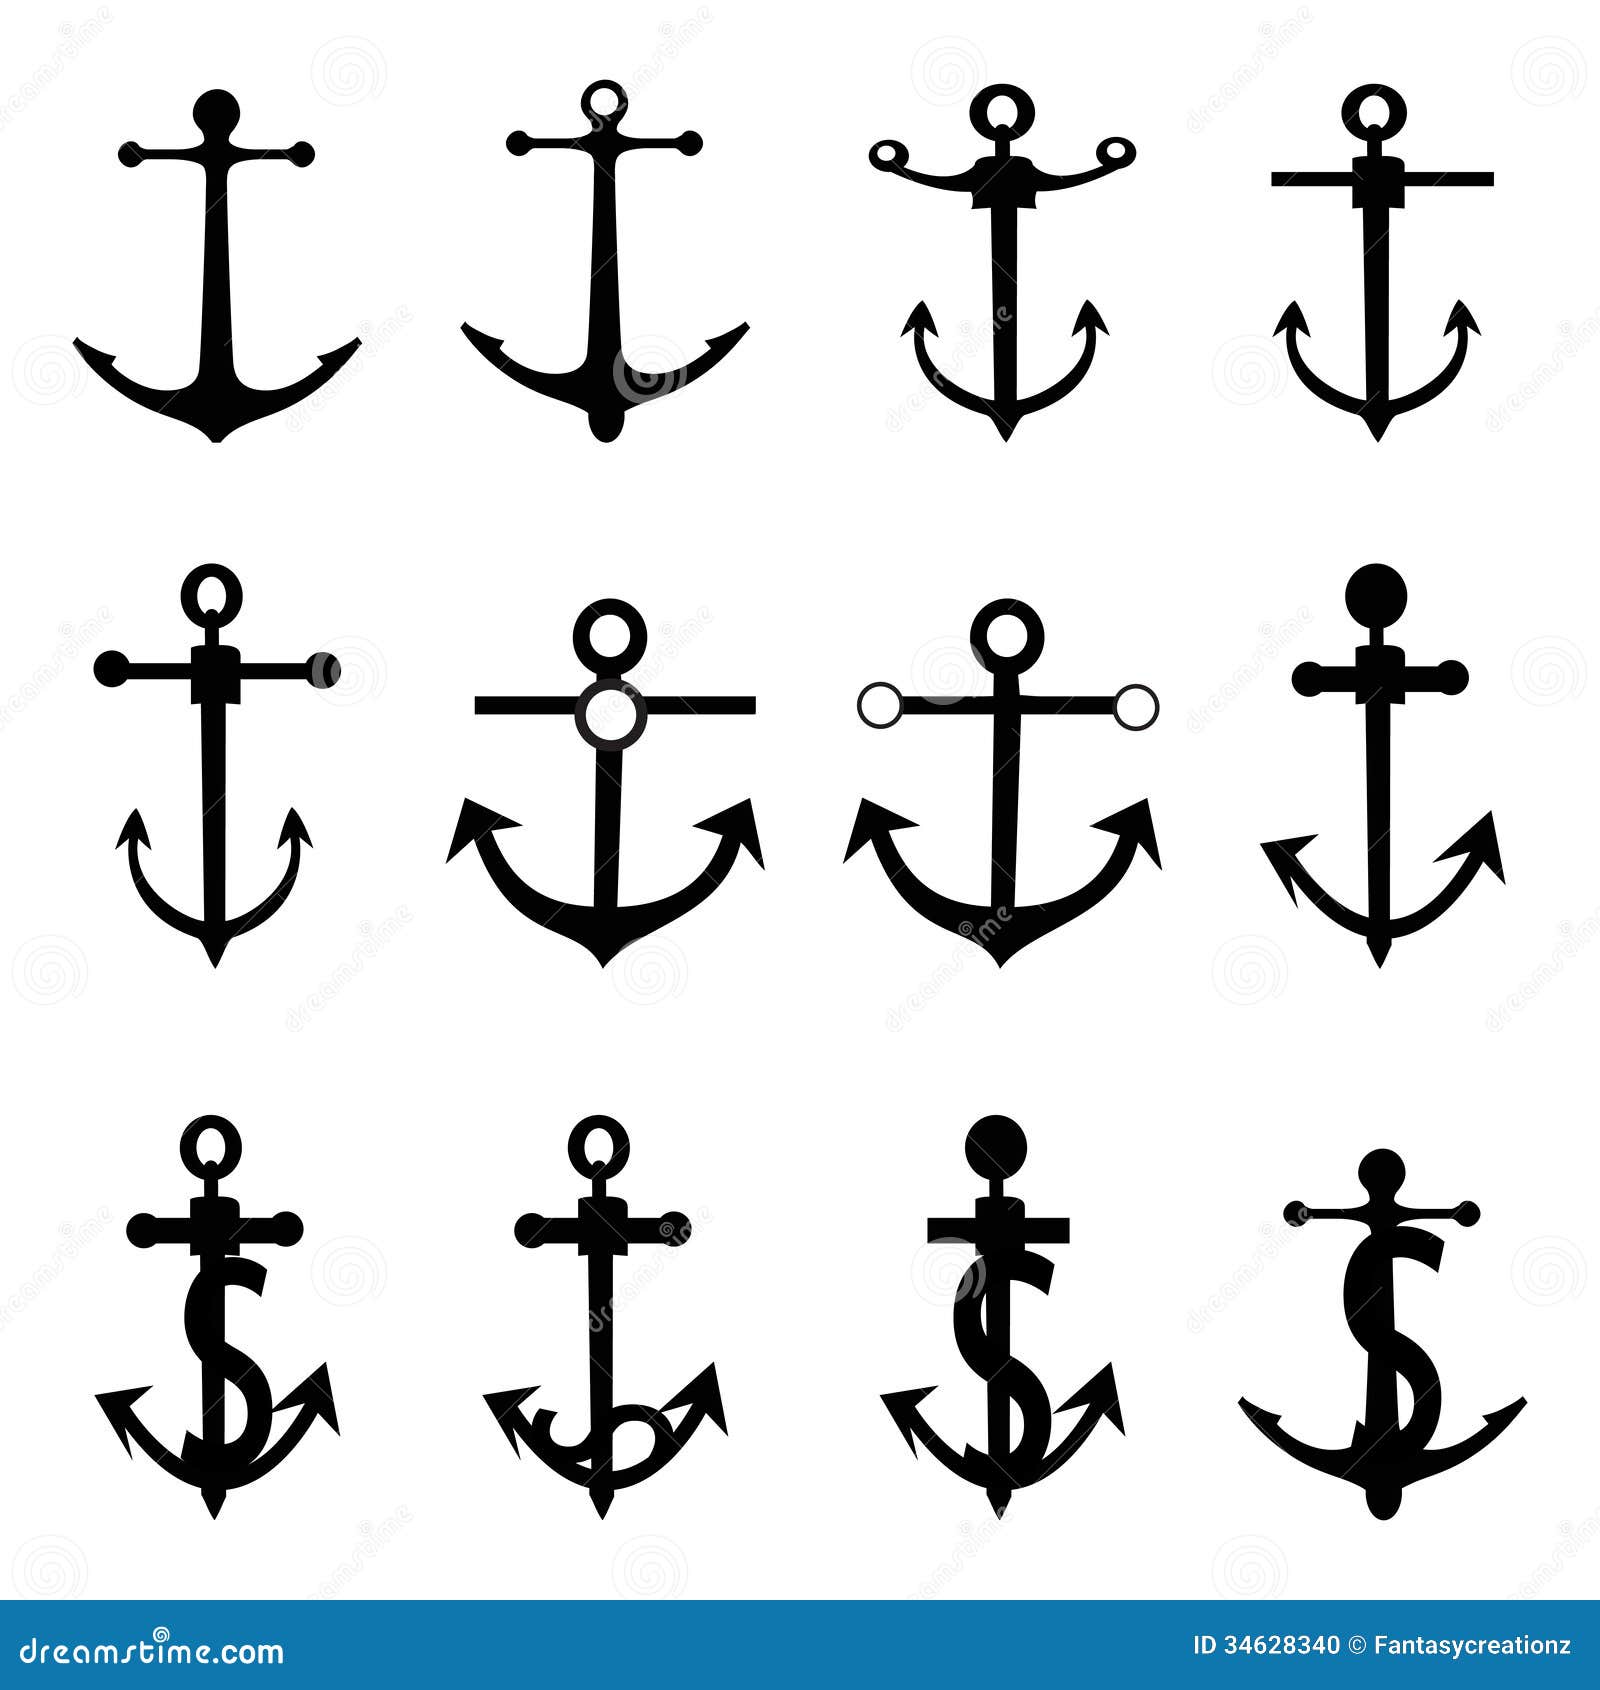 Anchor Vector Art Icons and Graphics for Free Download